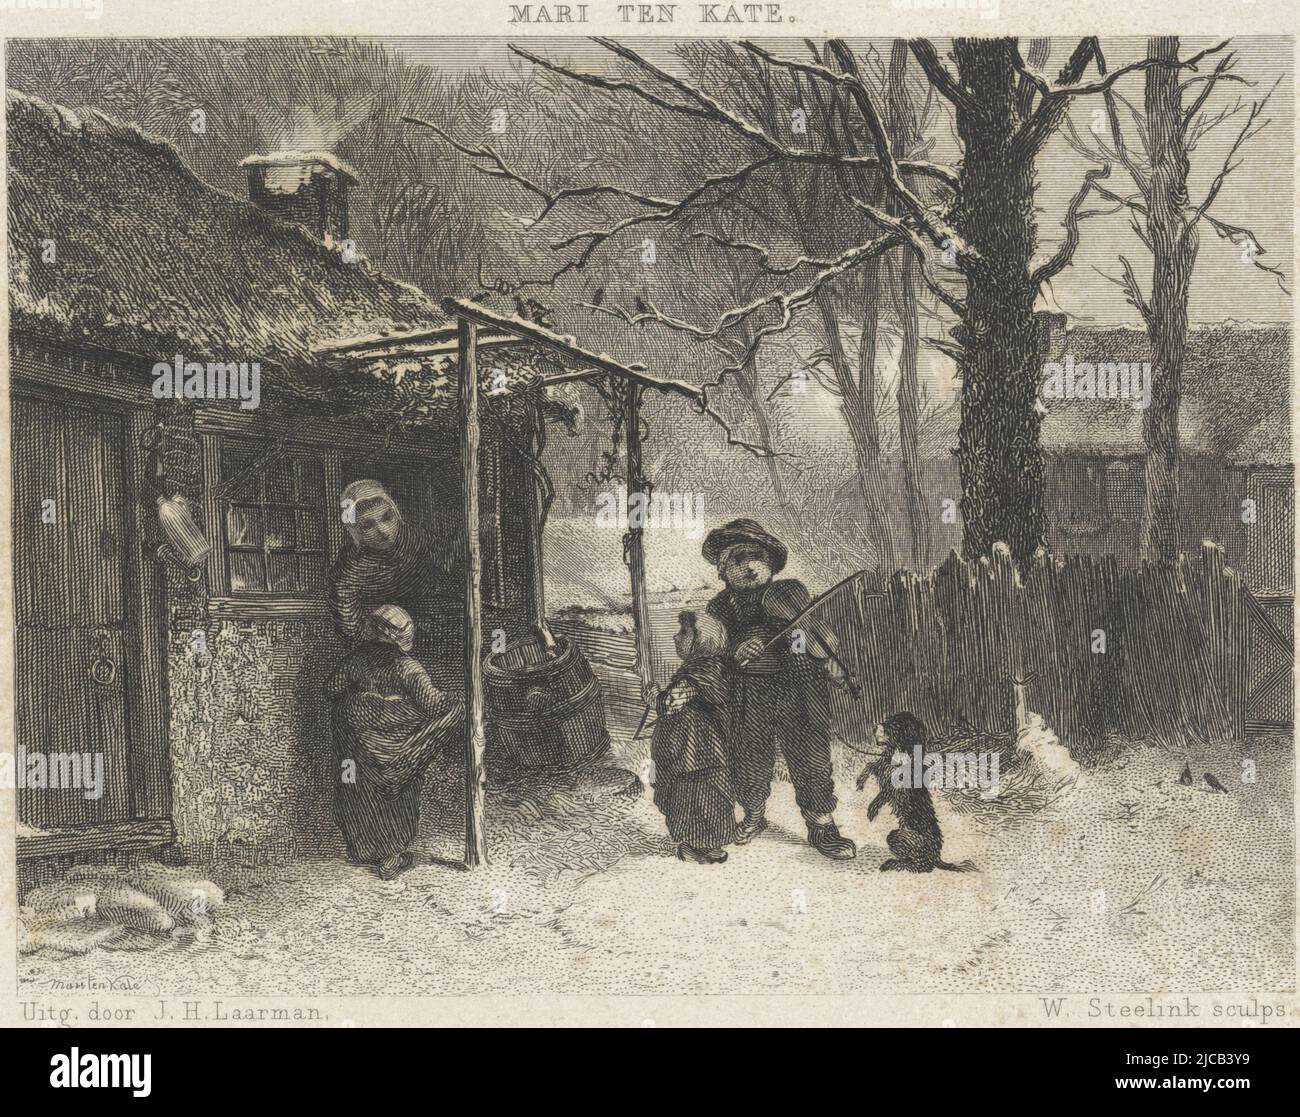 Street musicians in the snow near a house A boy plays violin, a girl triangles They have a dancing dog with them A girl accepts a reward from a woman who hands her something from the window, Street Musicians, print maker: Willem Steelink (I), (mentioned on object), Mari ten Kate, (mentioned on object), publisher: J.H. Laarman, (mentioned on object), Amsterdam, 1866, paper, steel engraving, etching, h 95 mm × w 154 mm Stock Photo